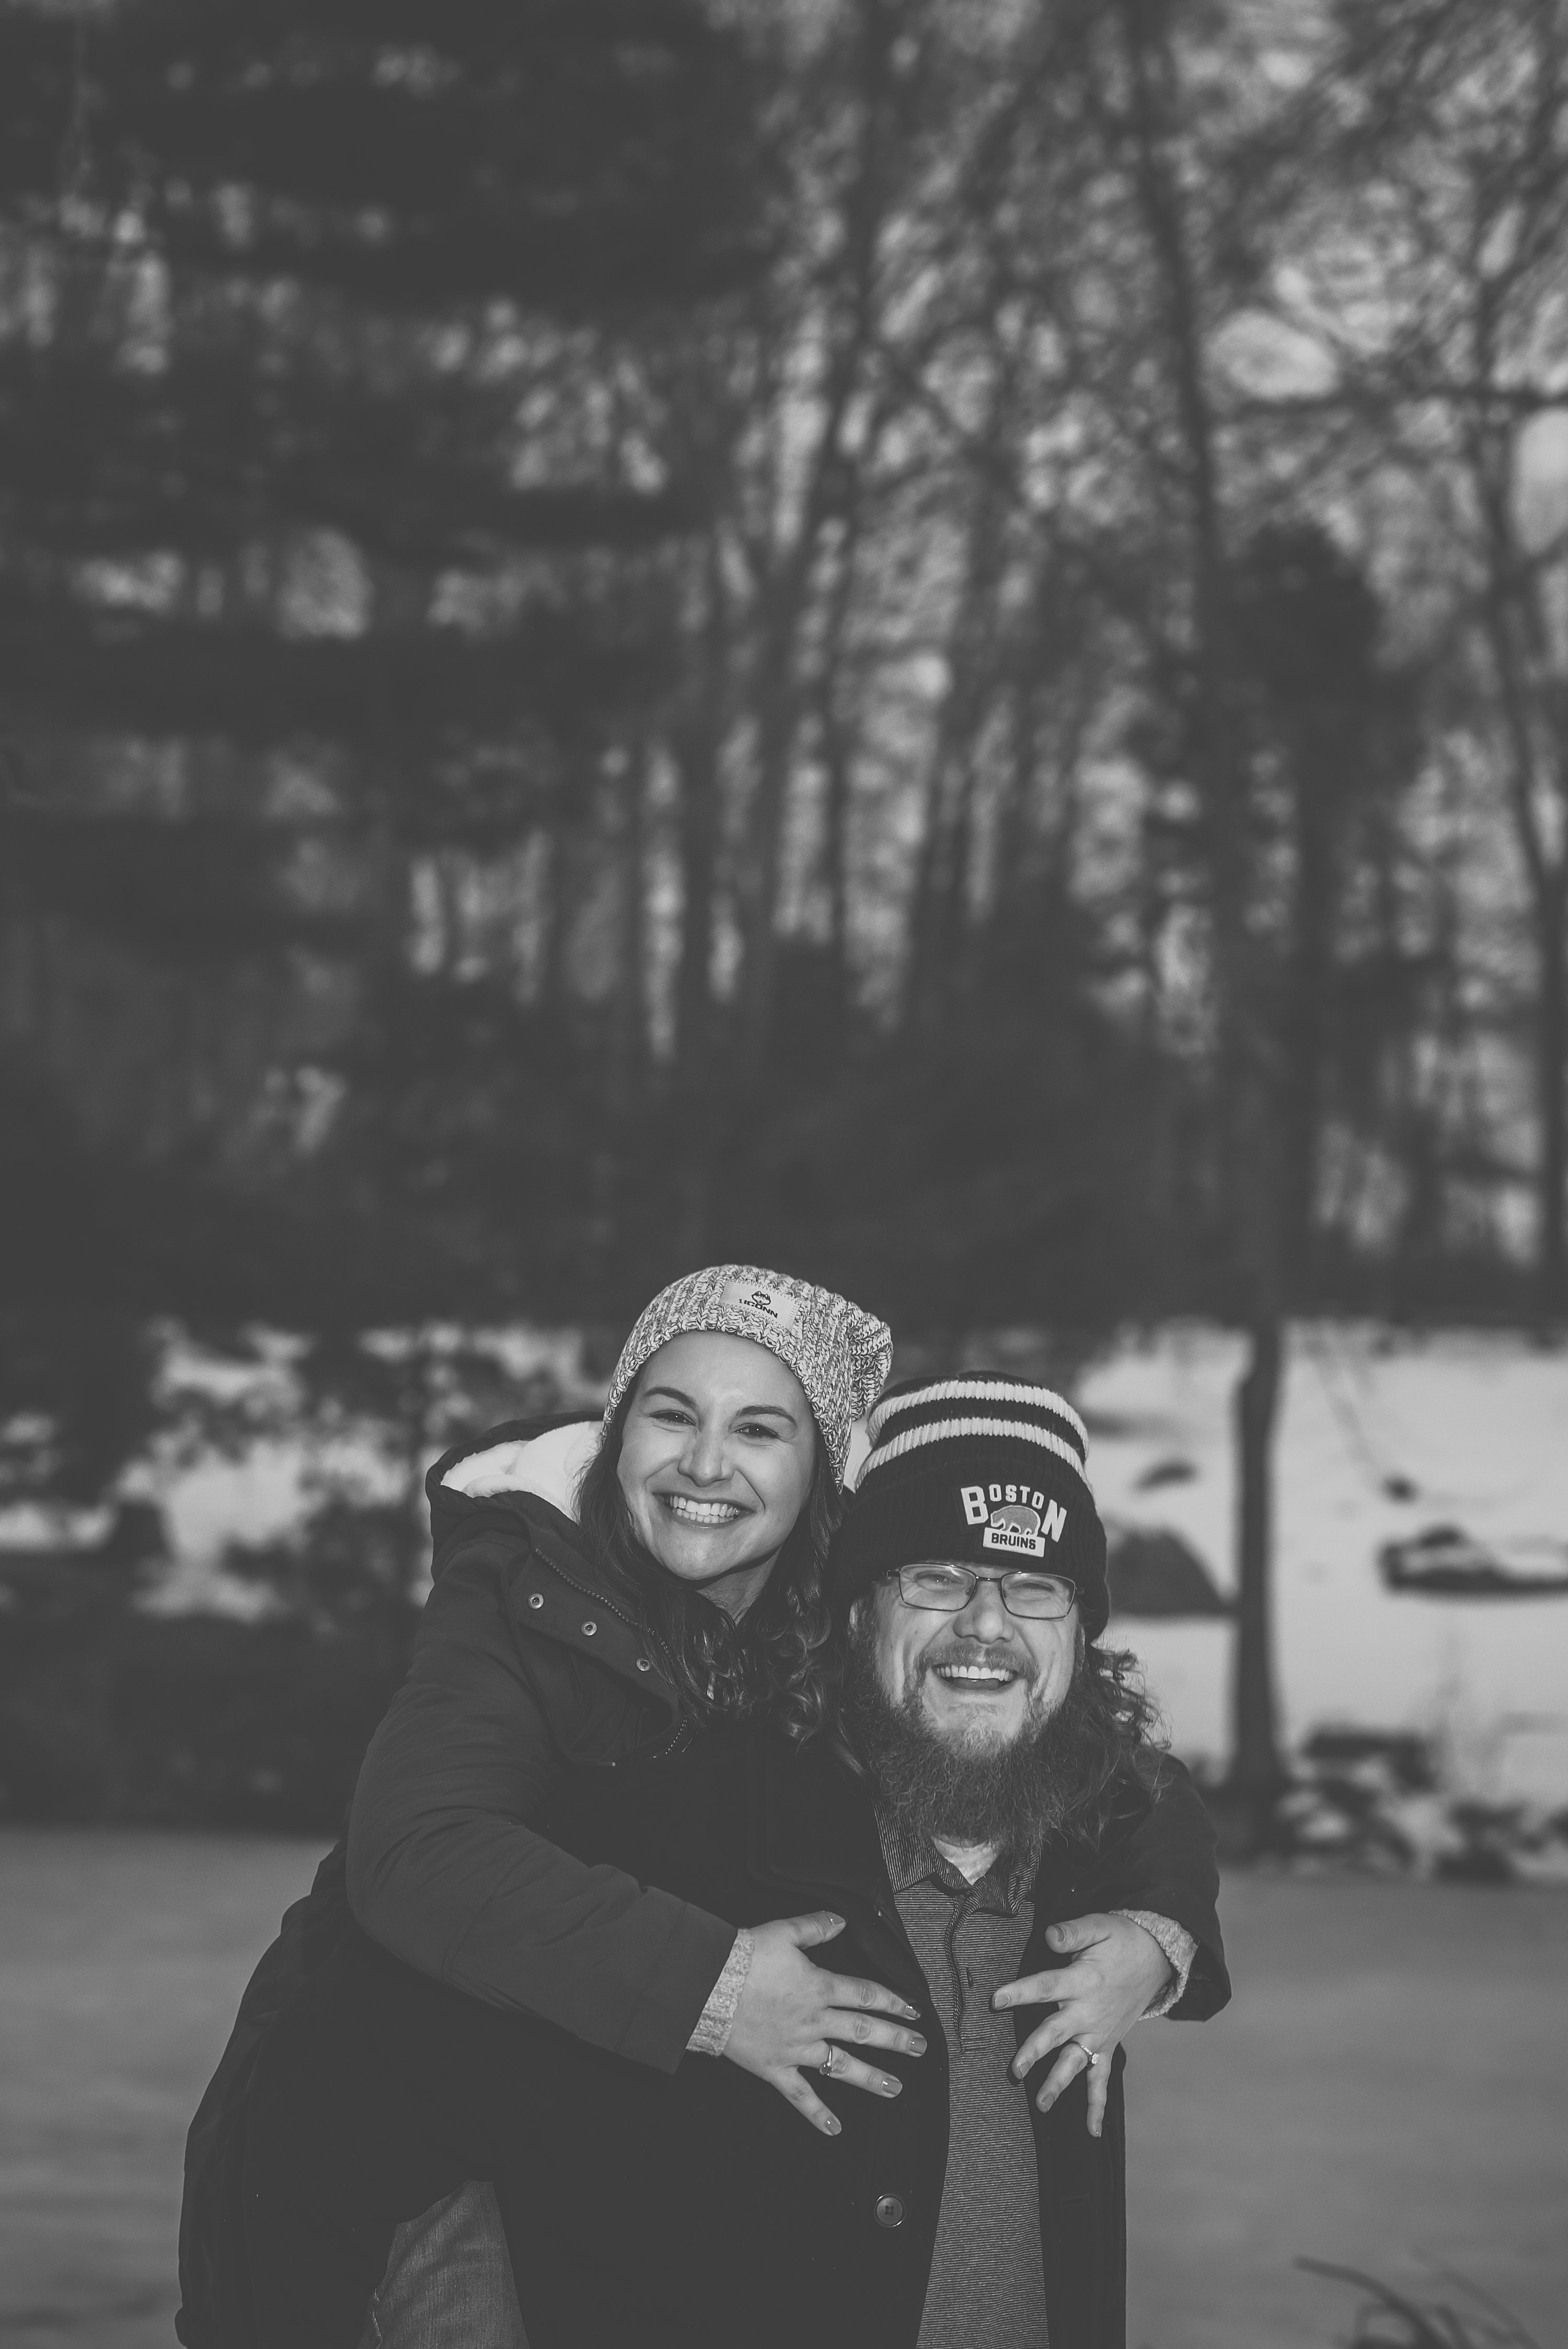 Maureen Russell Photography,Sharon Wedding Photographer,Fun in the Snow at Engagement Session,Cute Engagement Images,How to have fun at engagement session